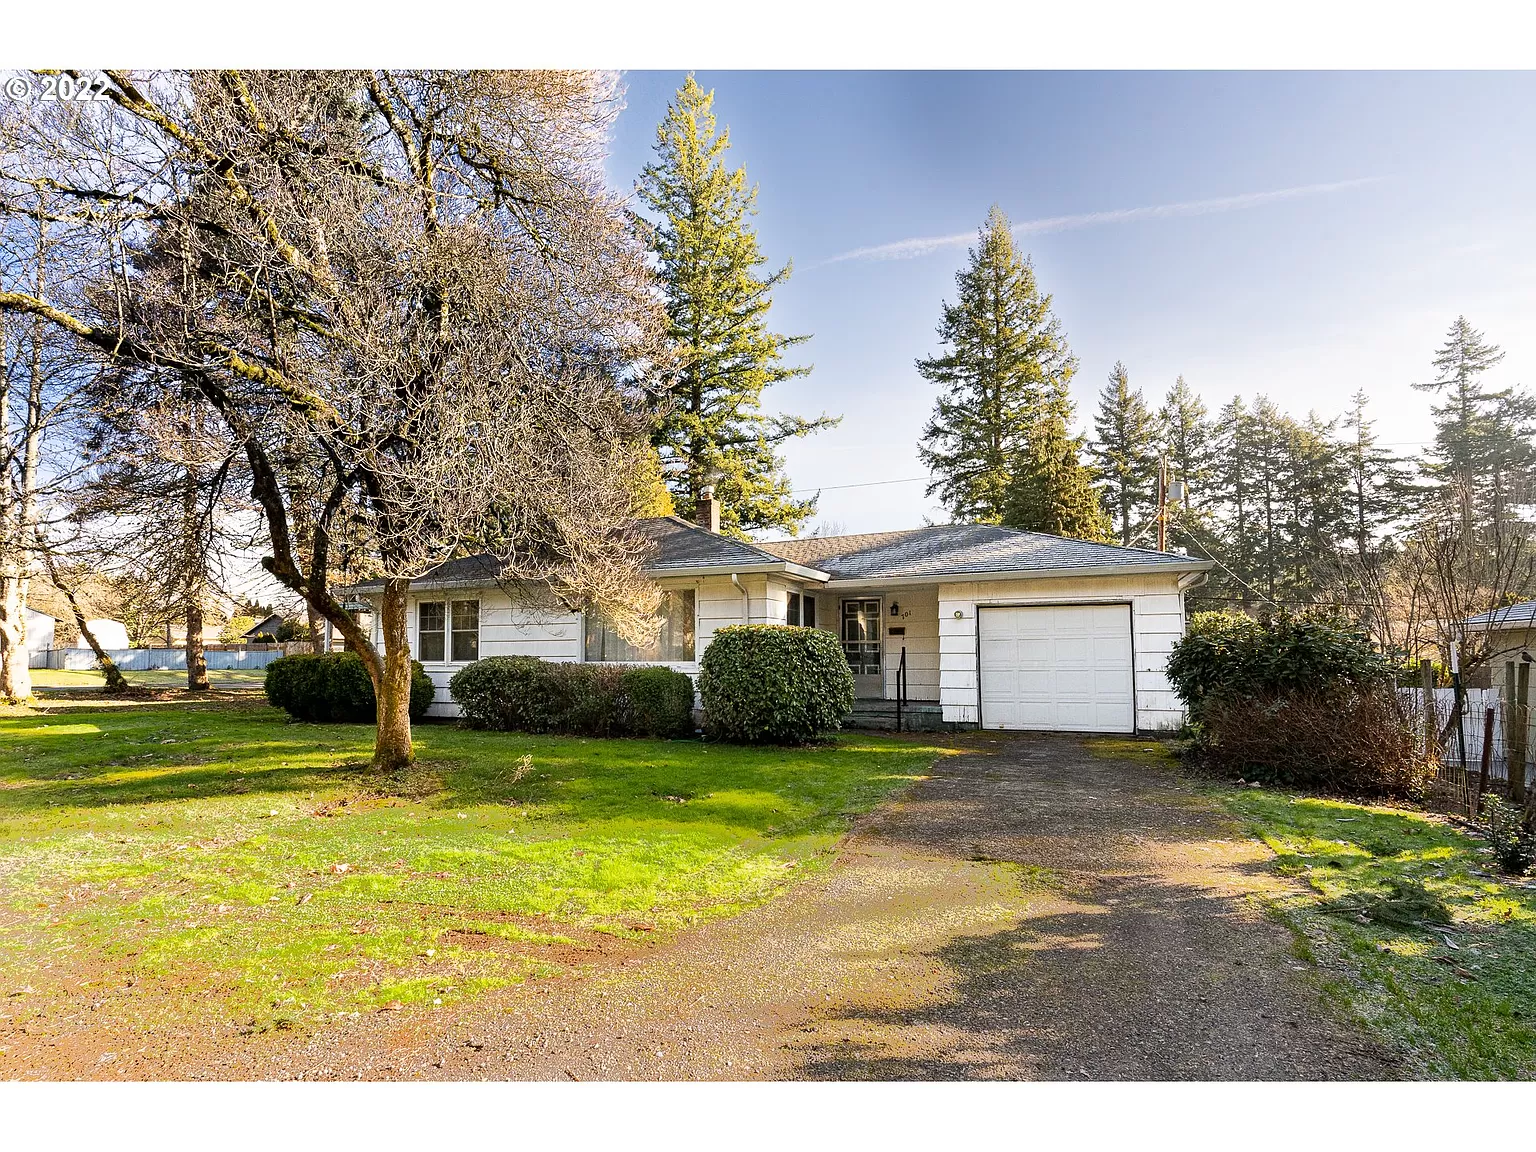 701 Mount Shasta Dr, Vancouver, WA 98664 | Zillow